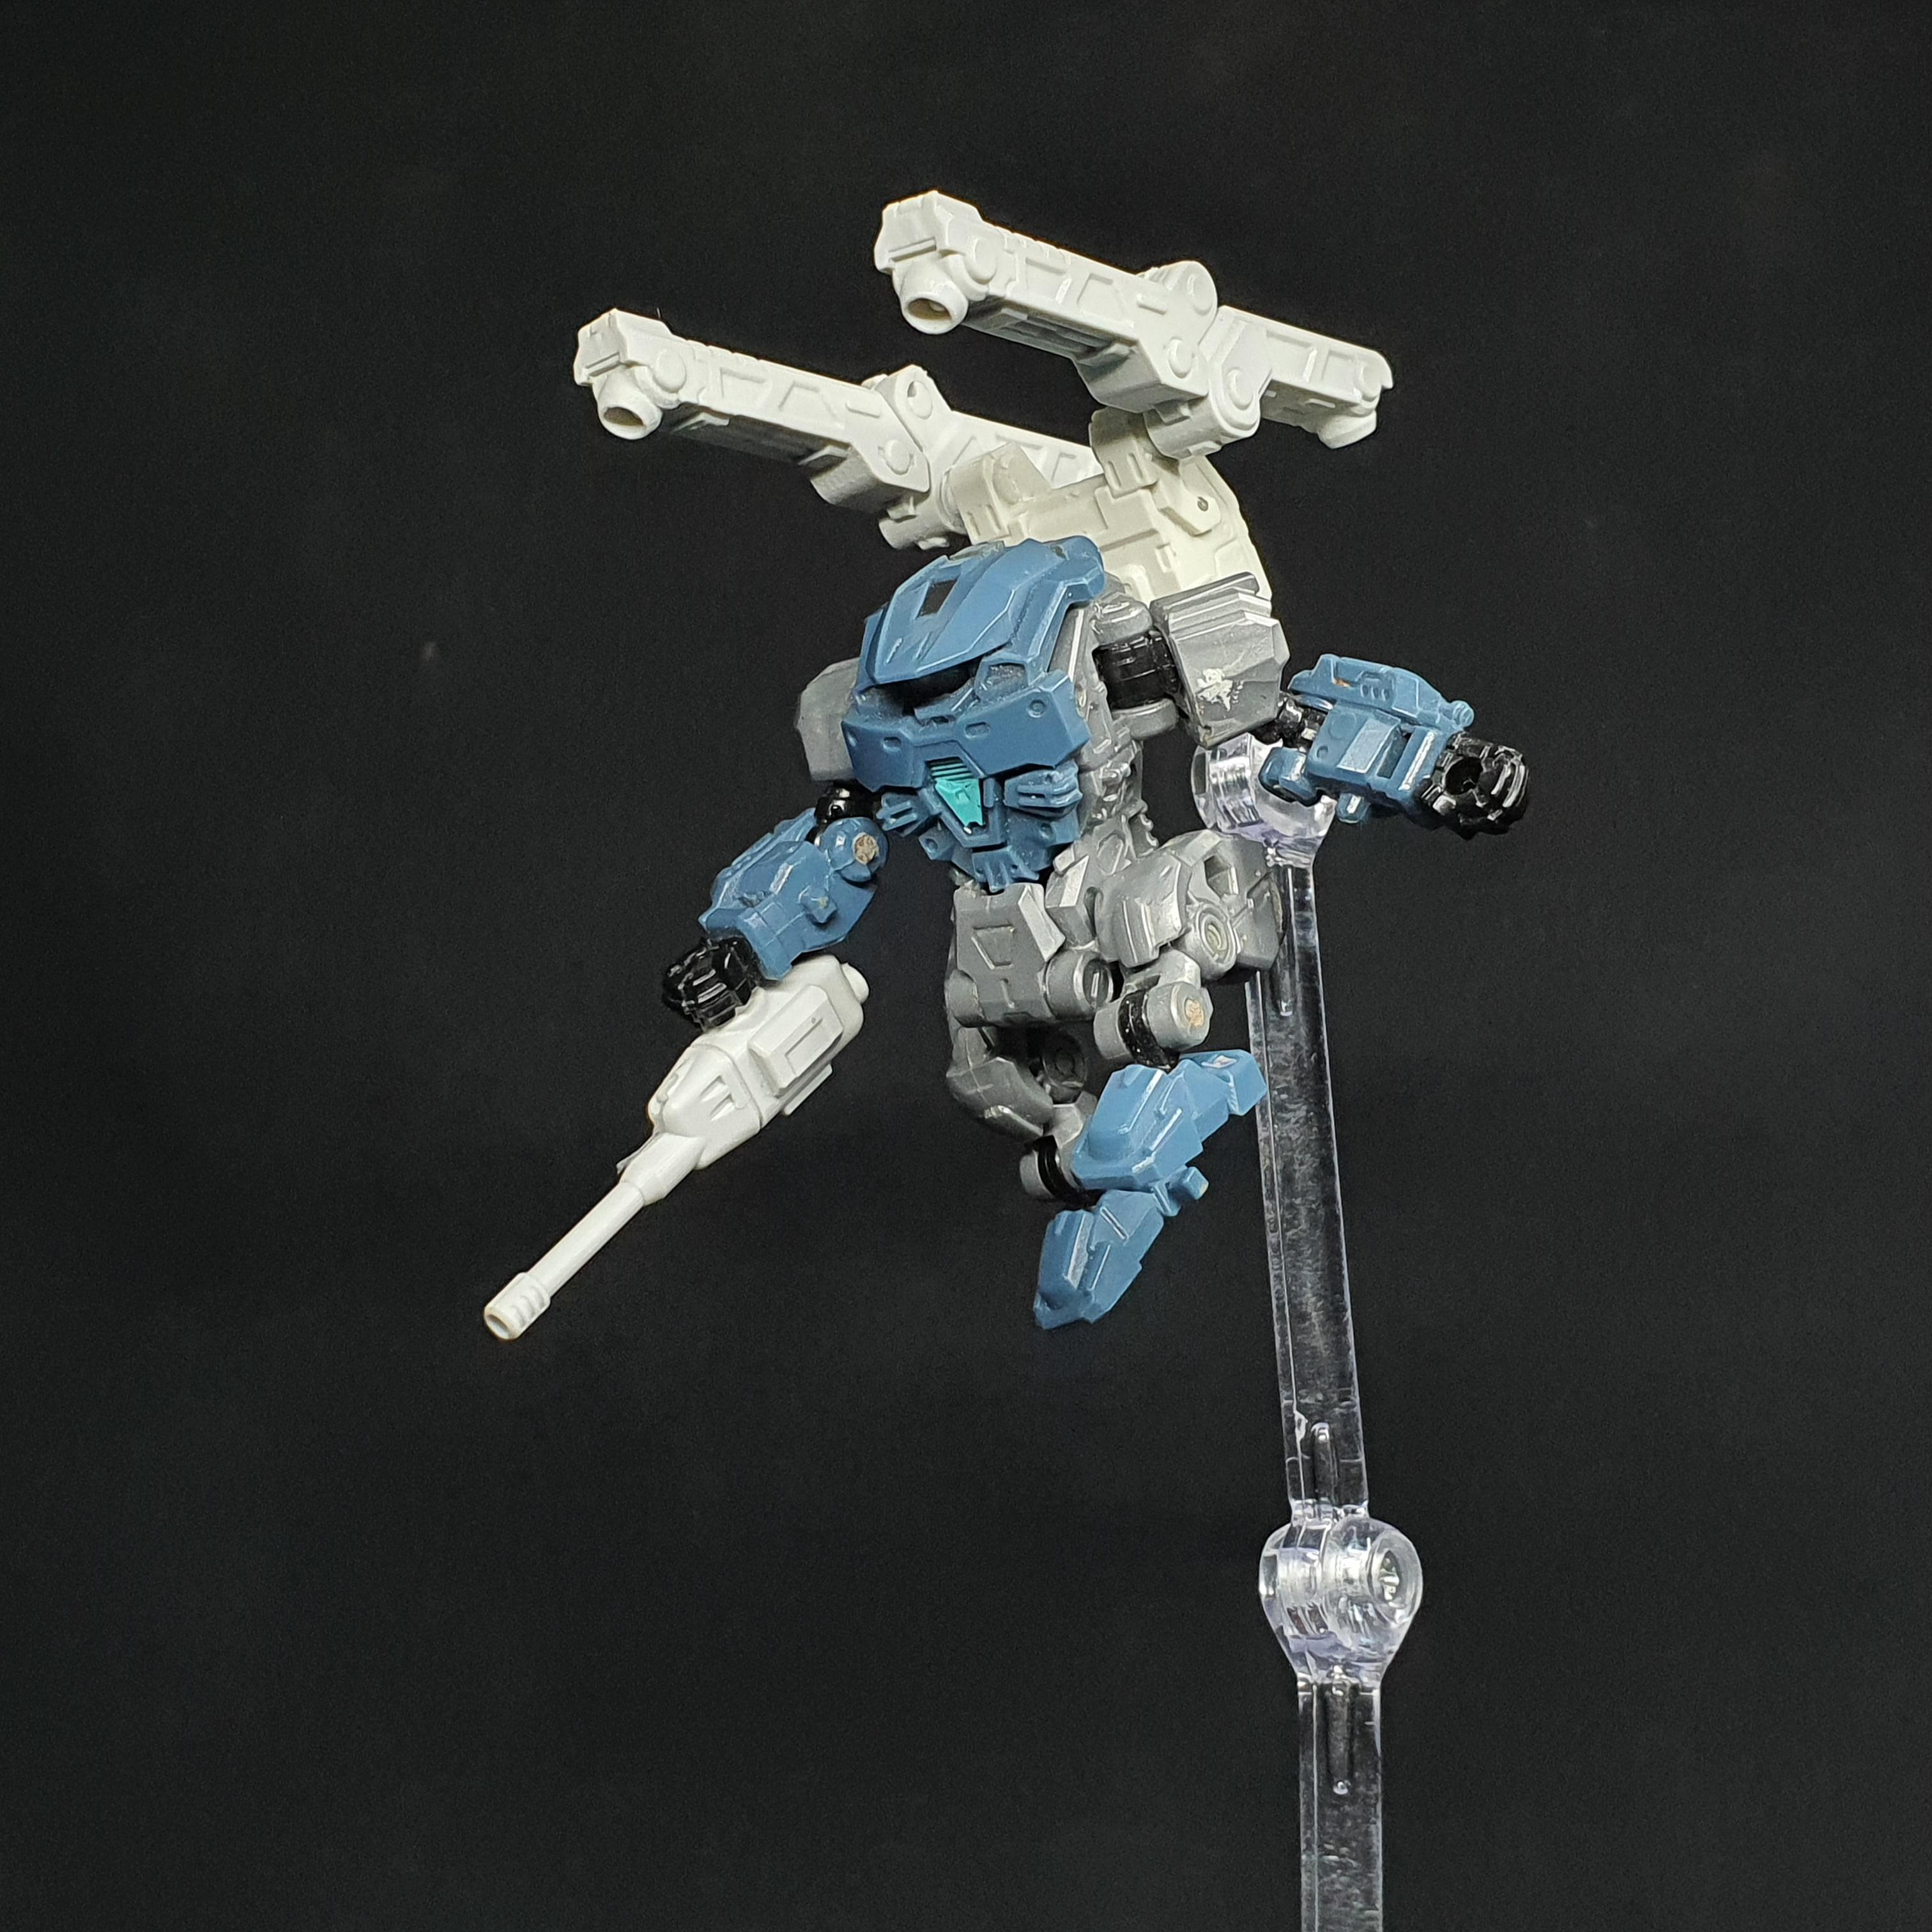 1/100 scale EISENFRONT, 1/24 scale "Ascension" jump jet.